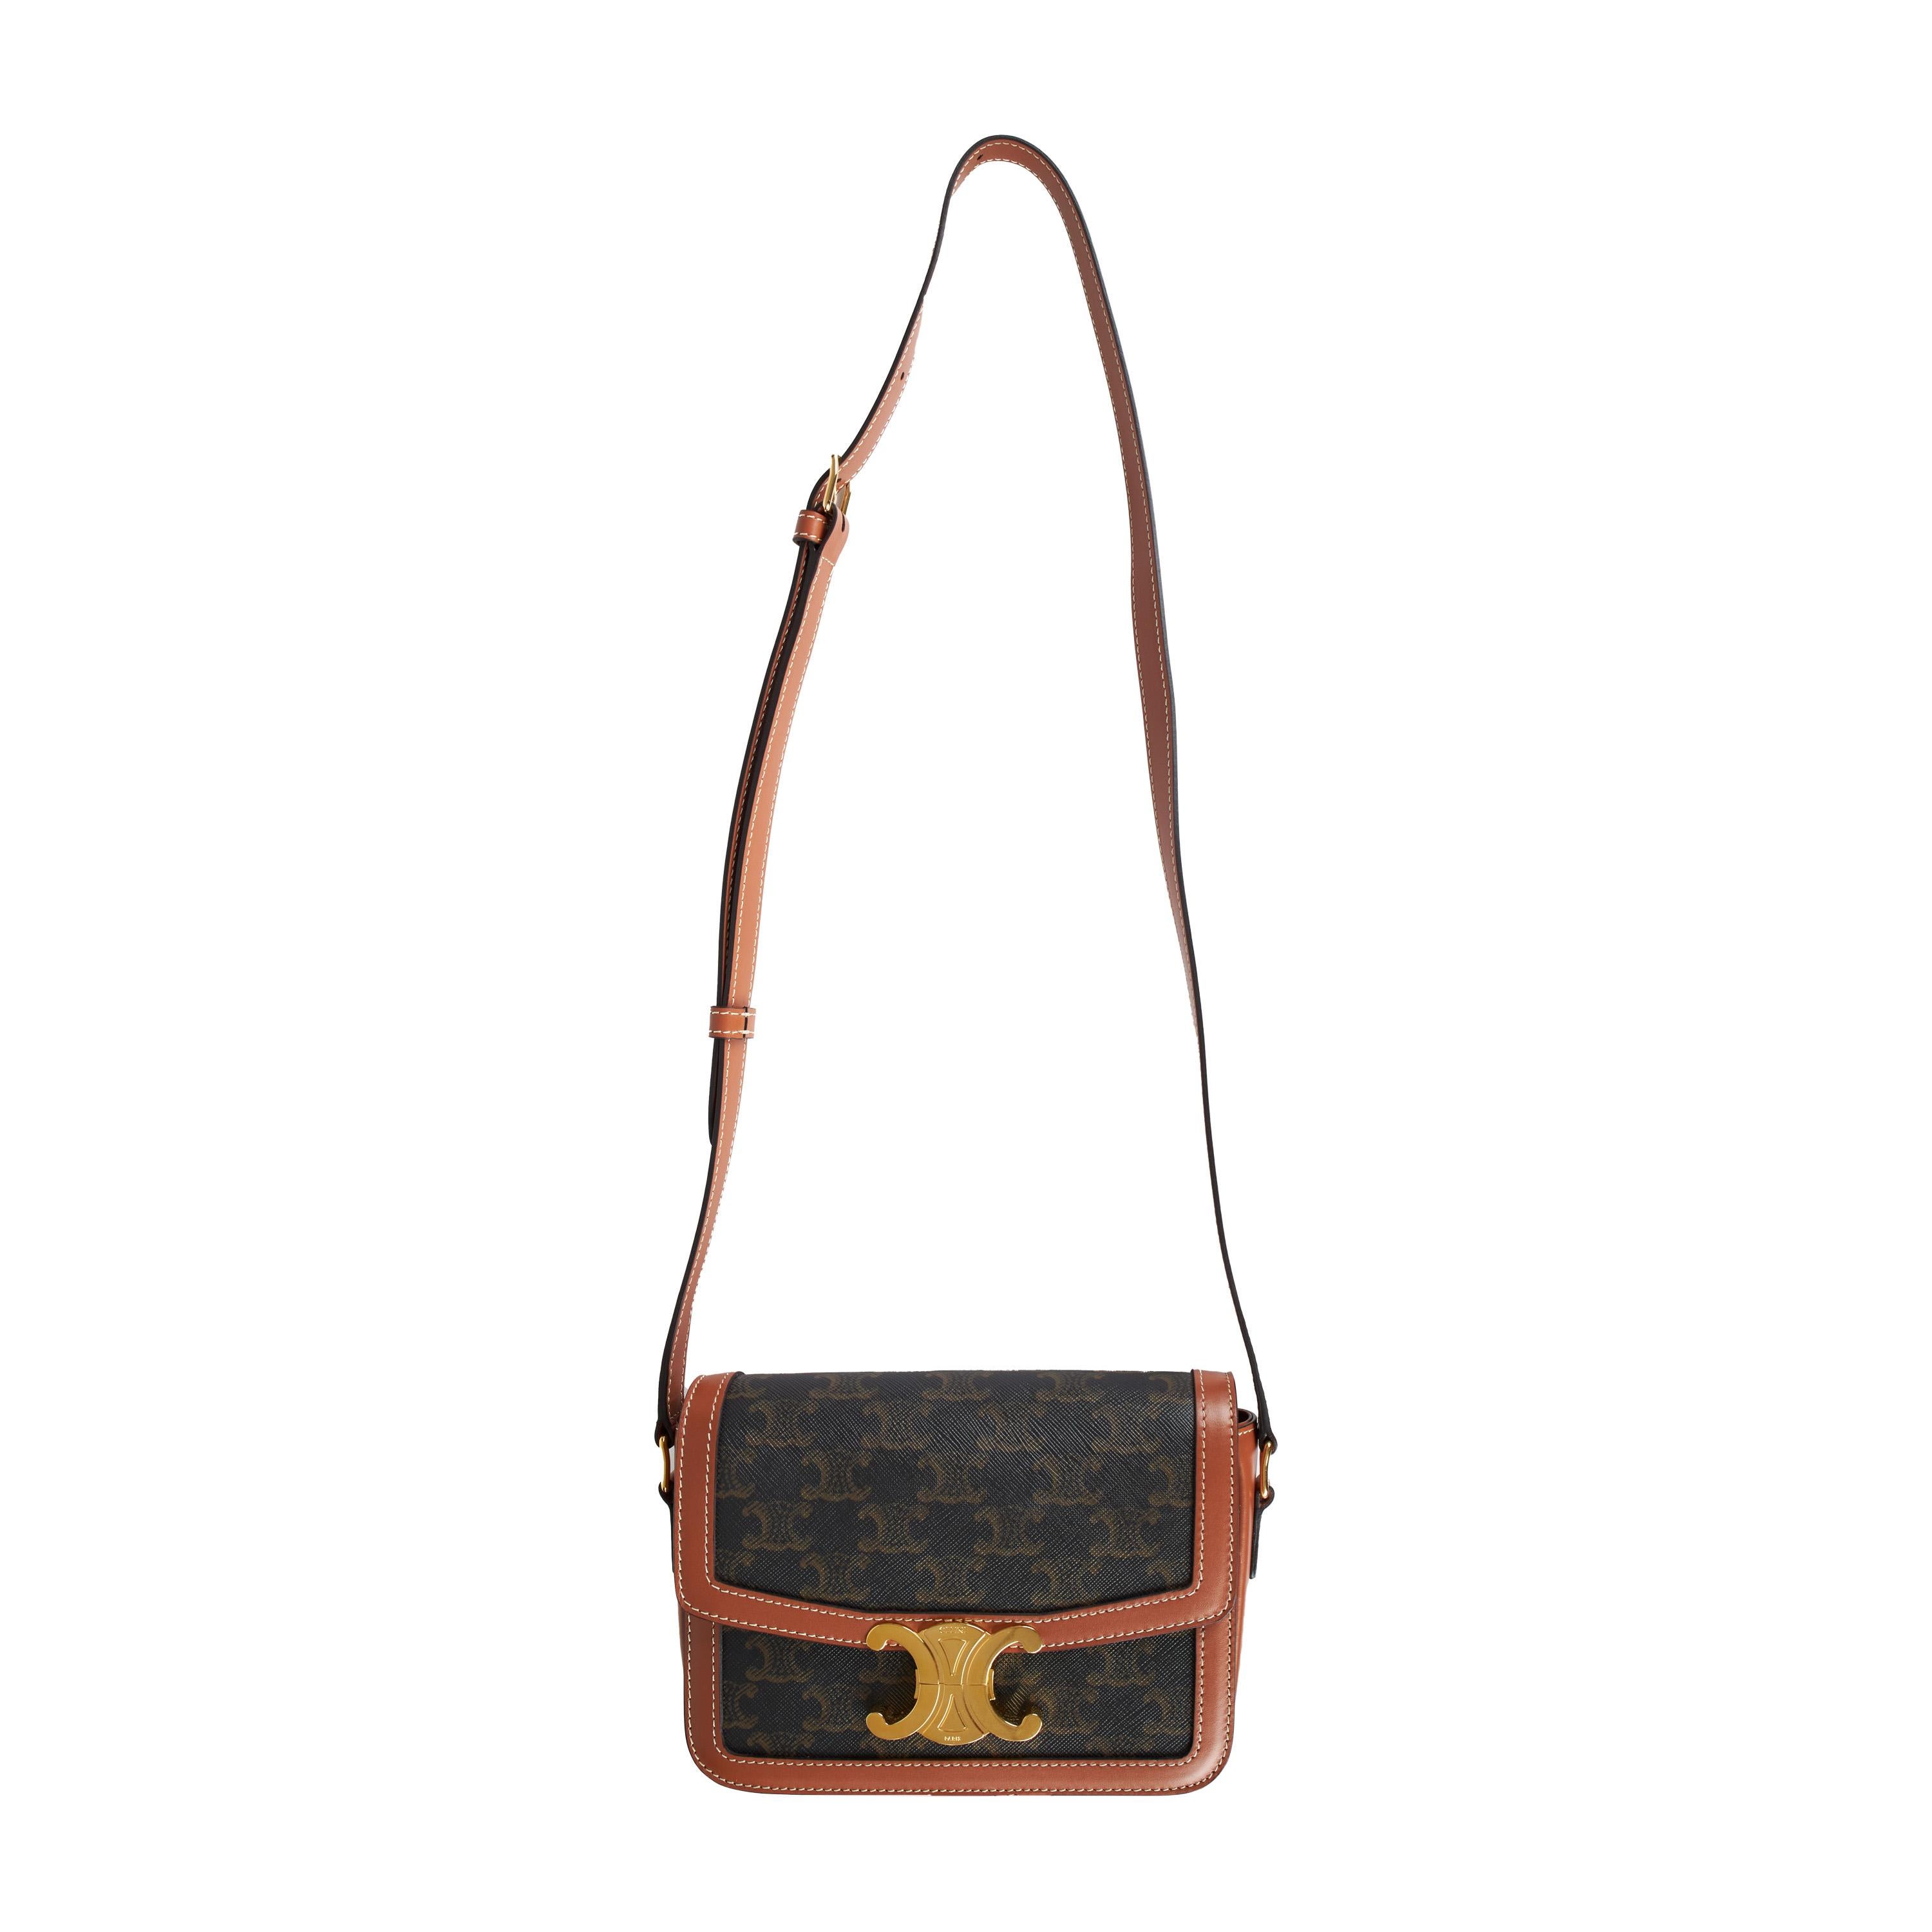 The Celine Teen Triomphe Crossbody Bag, crafted with a Triomphe print canvas and trimmings in calfskin, it features a gold finishing on its signature triomphe clasp-lock closure. With two ways to carry: cross-body or shoulder and three inner